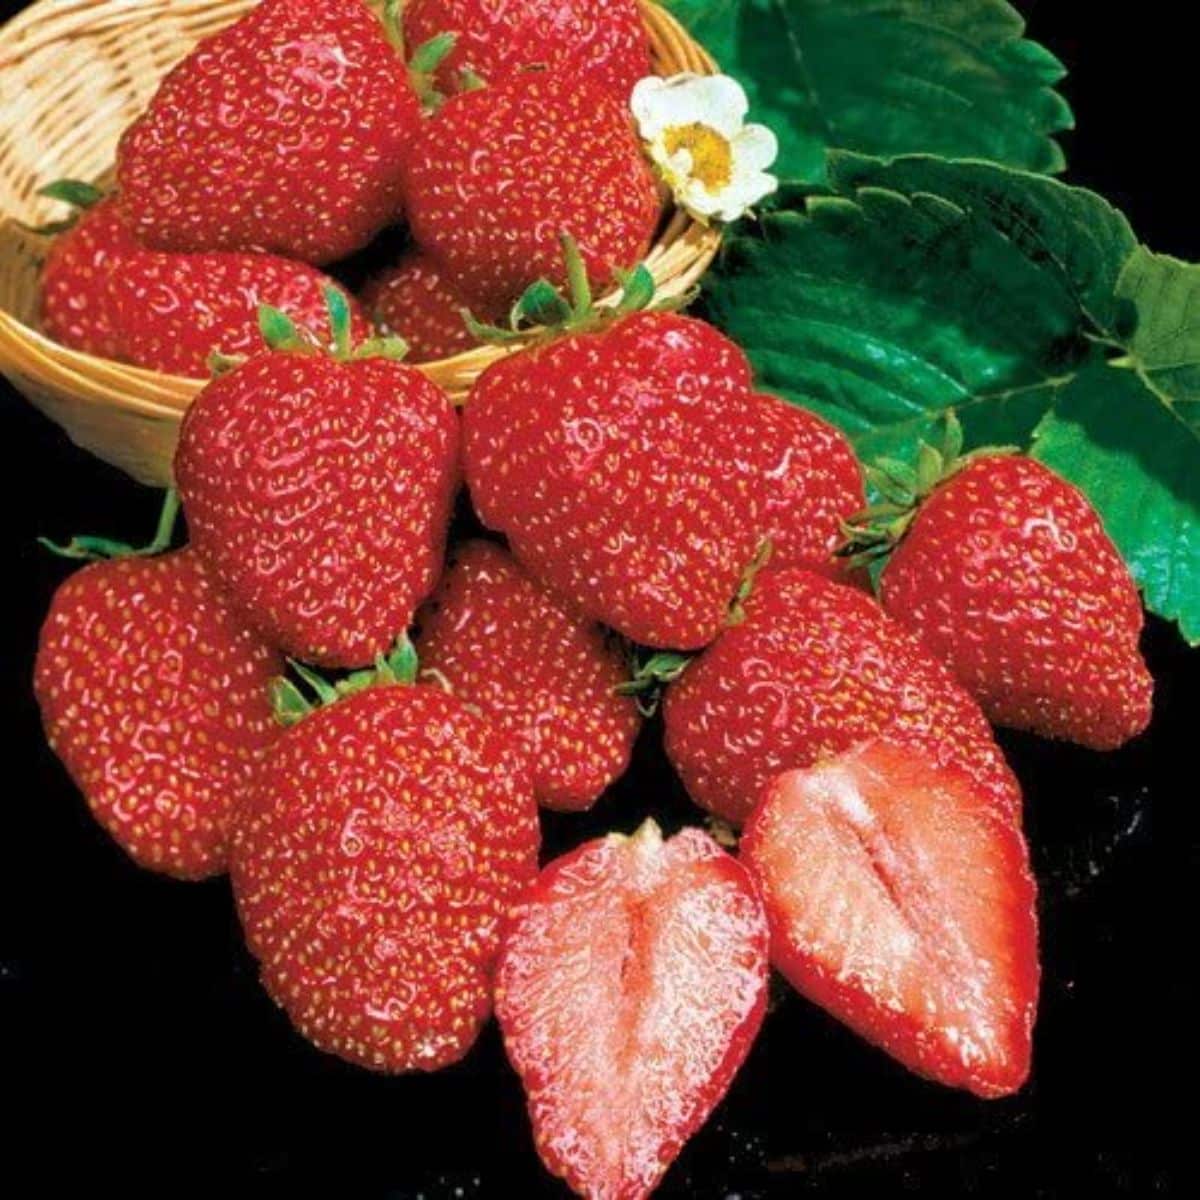 Frehsly picked ripe earliglow strawberries in a basket, and on a table.